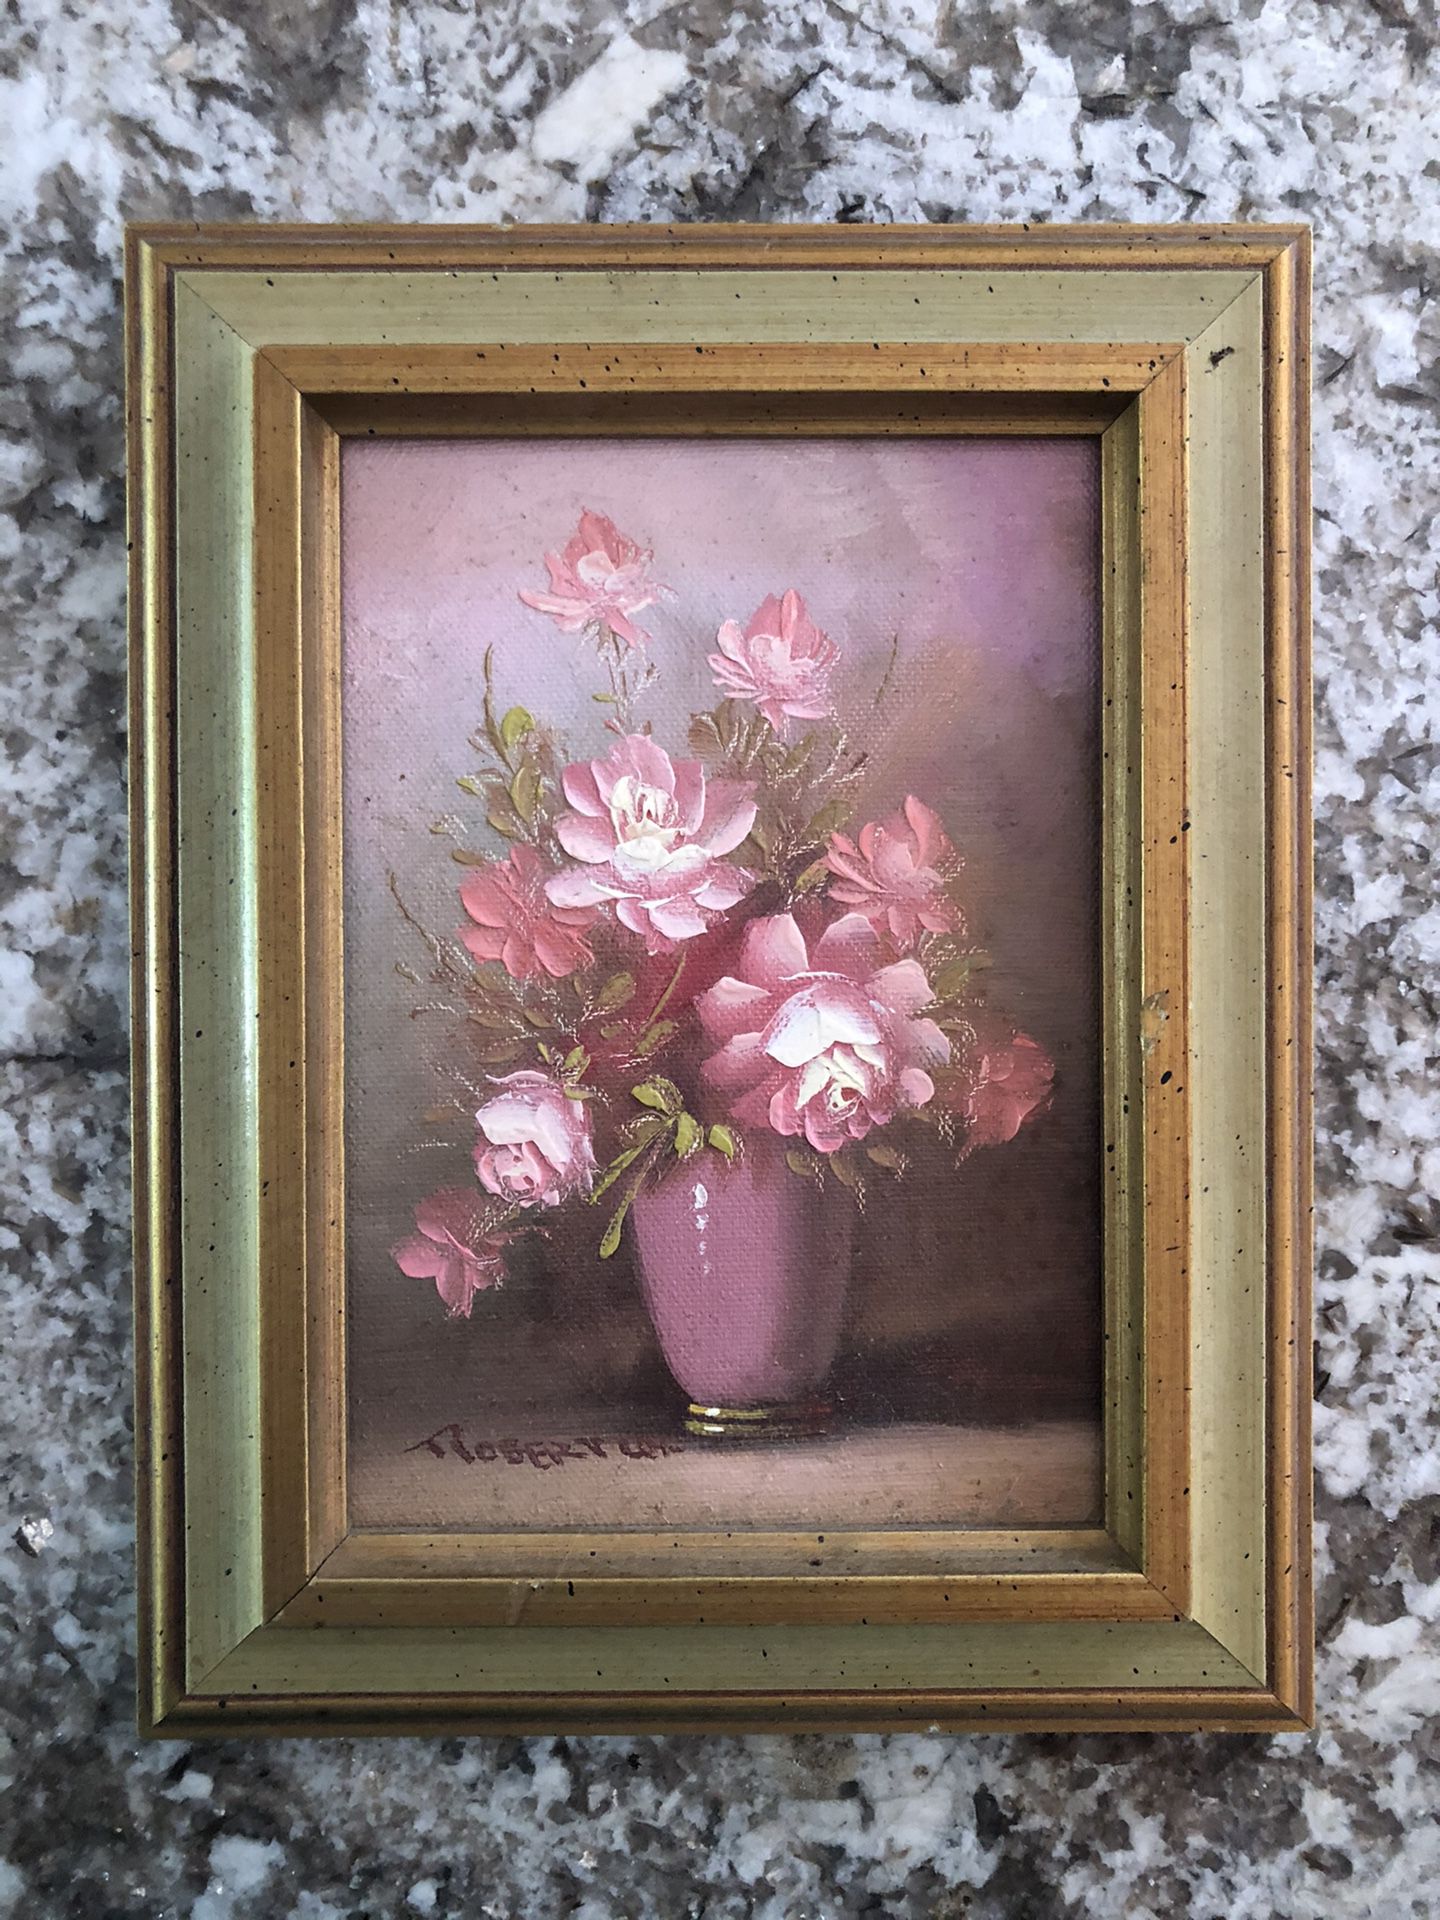 9”X7” Framed Oil Painting with Roses in Vase